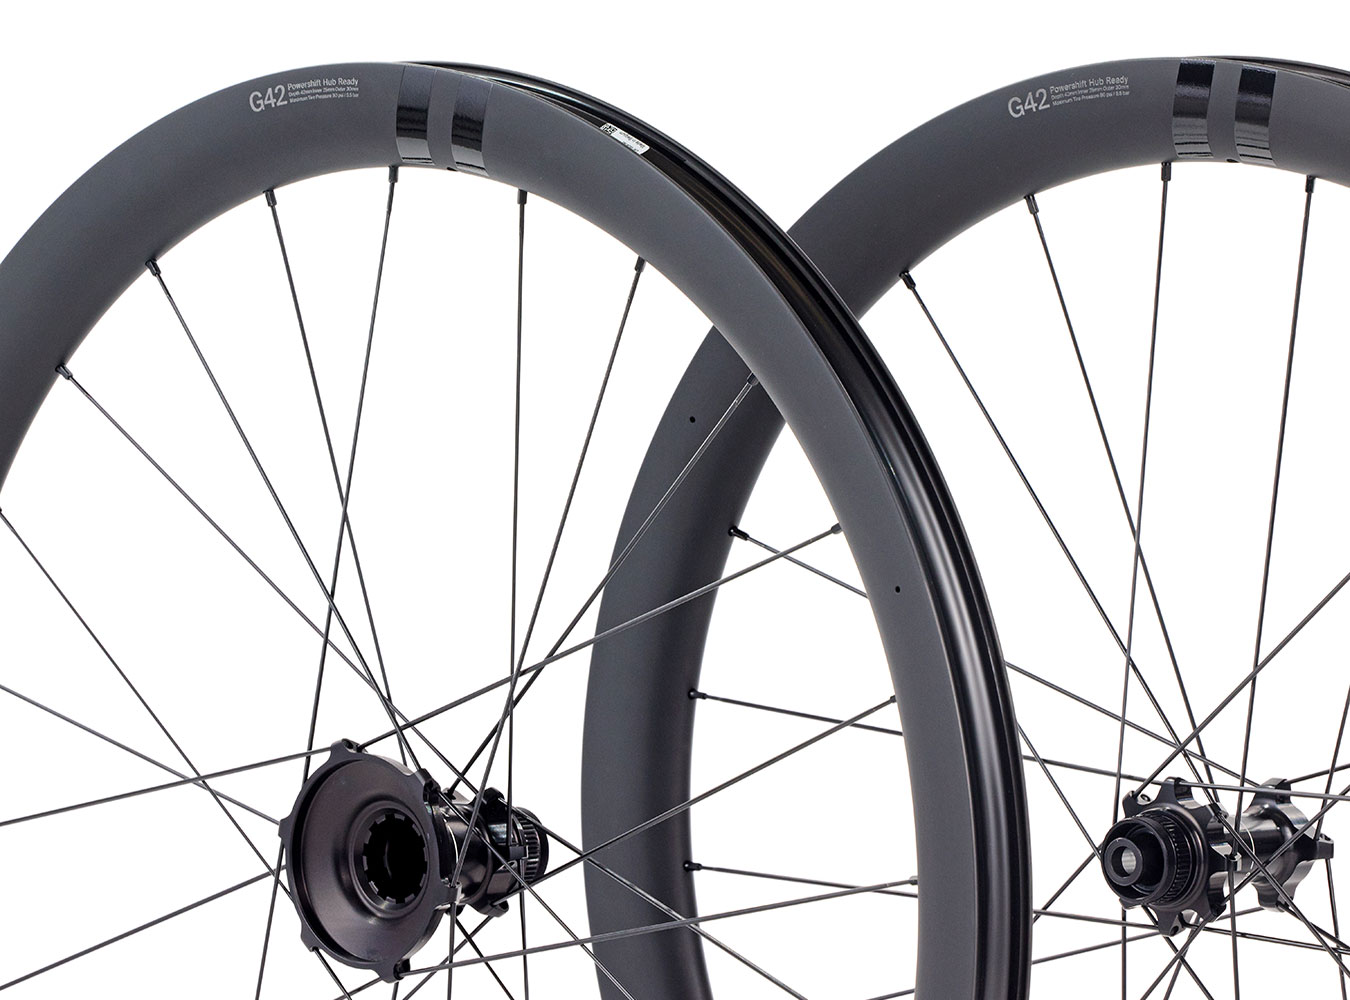 Classified Wheels, wider more aero road and gravel Powershift wheelsets, G42 detail